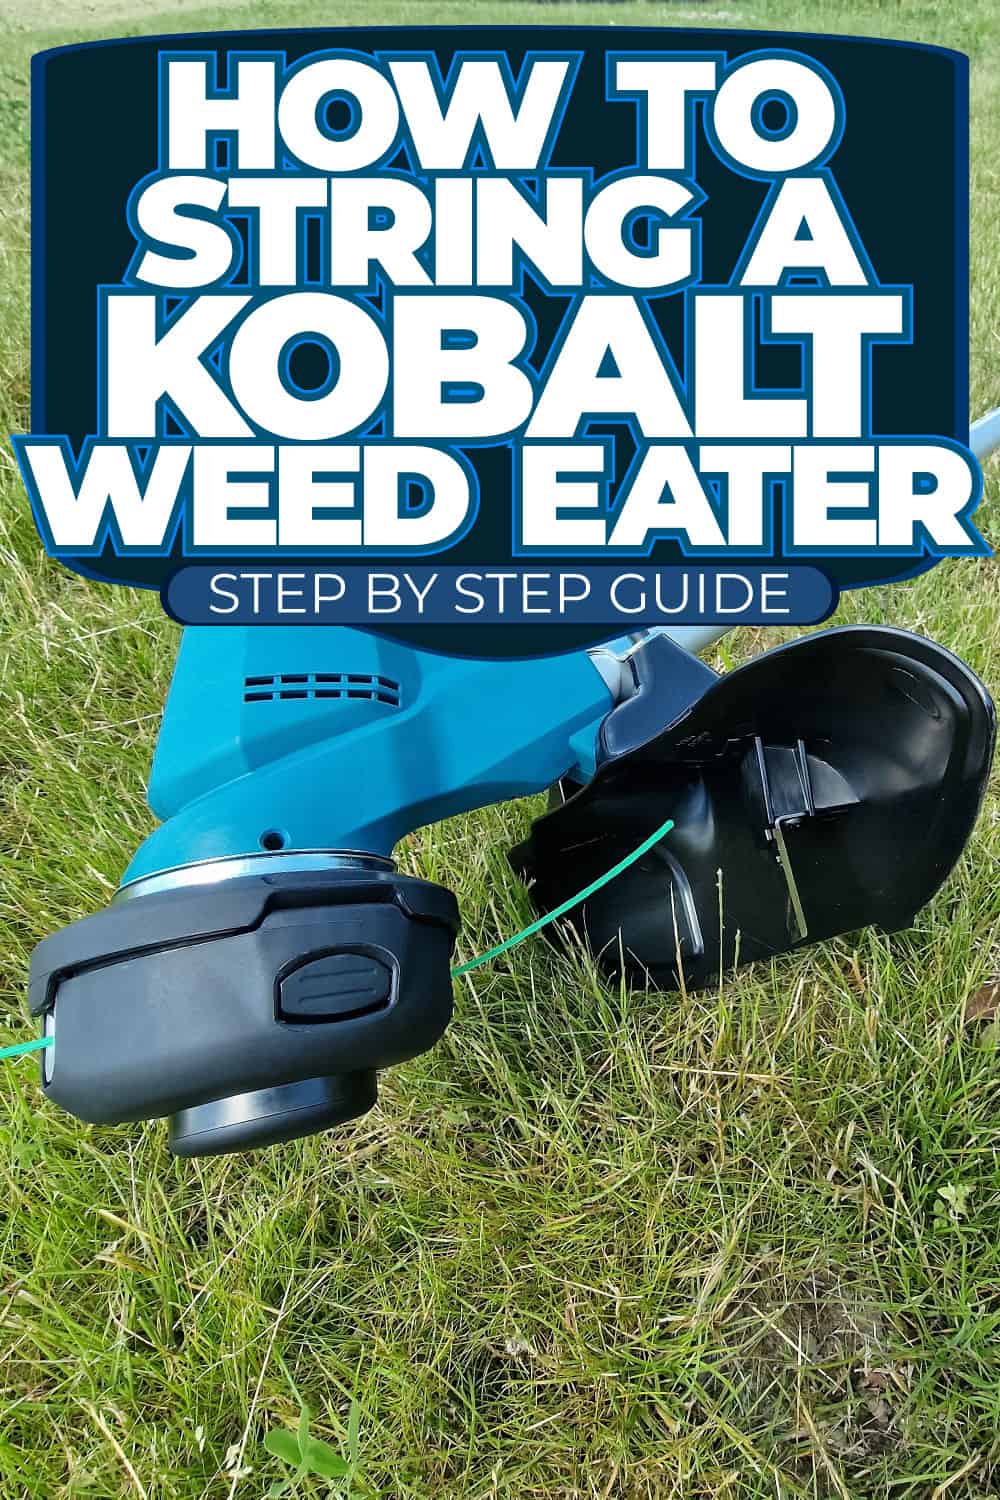 How To String A Kobalt Weed Eater [Step By Step Guide]